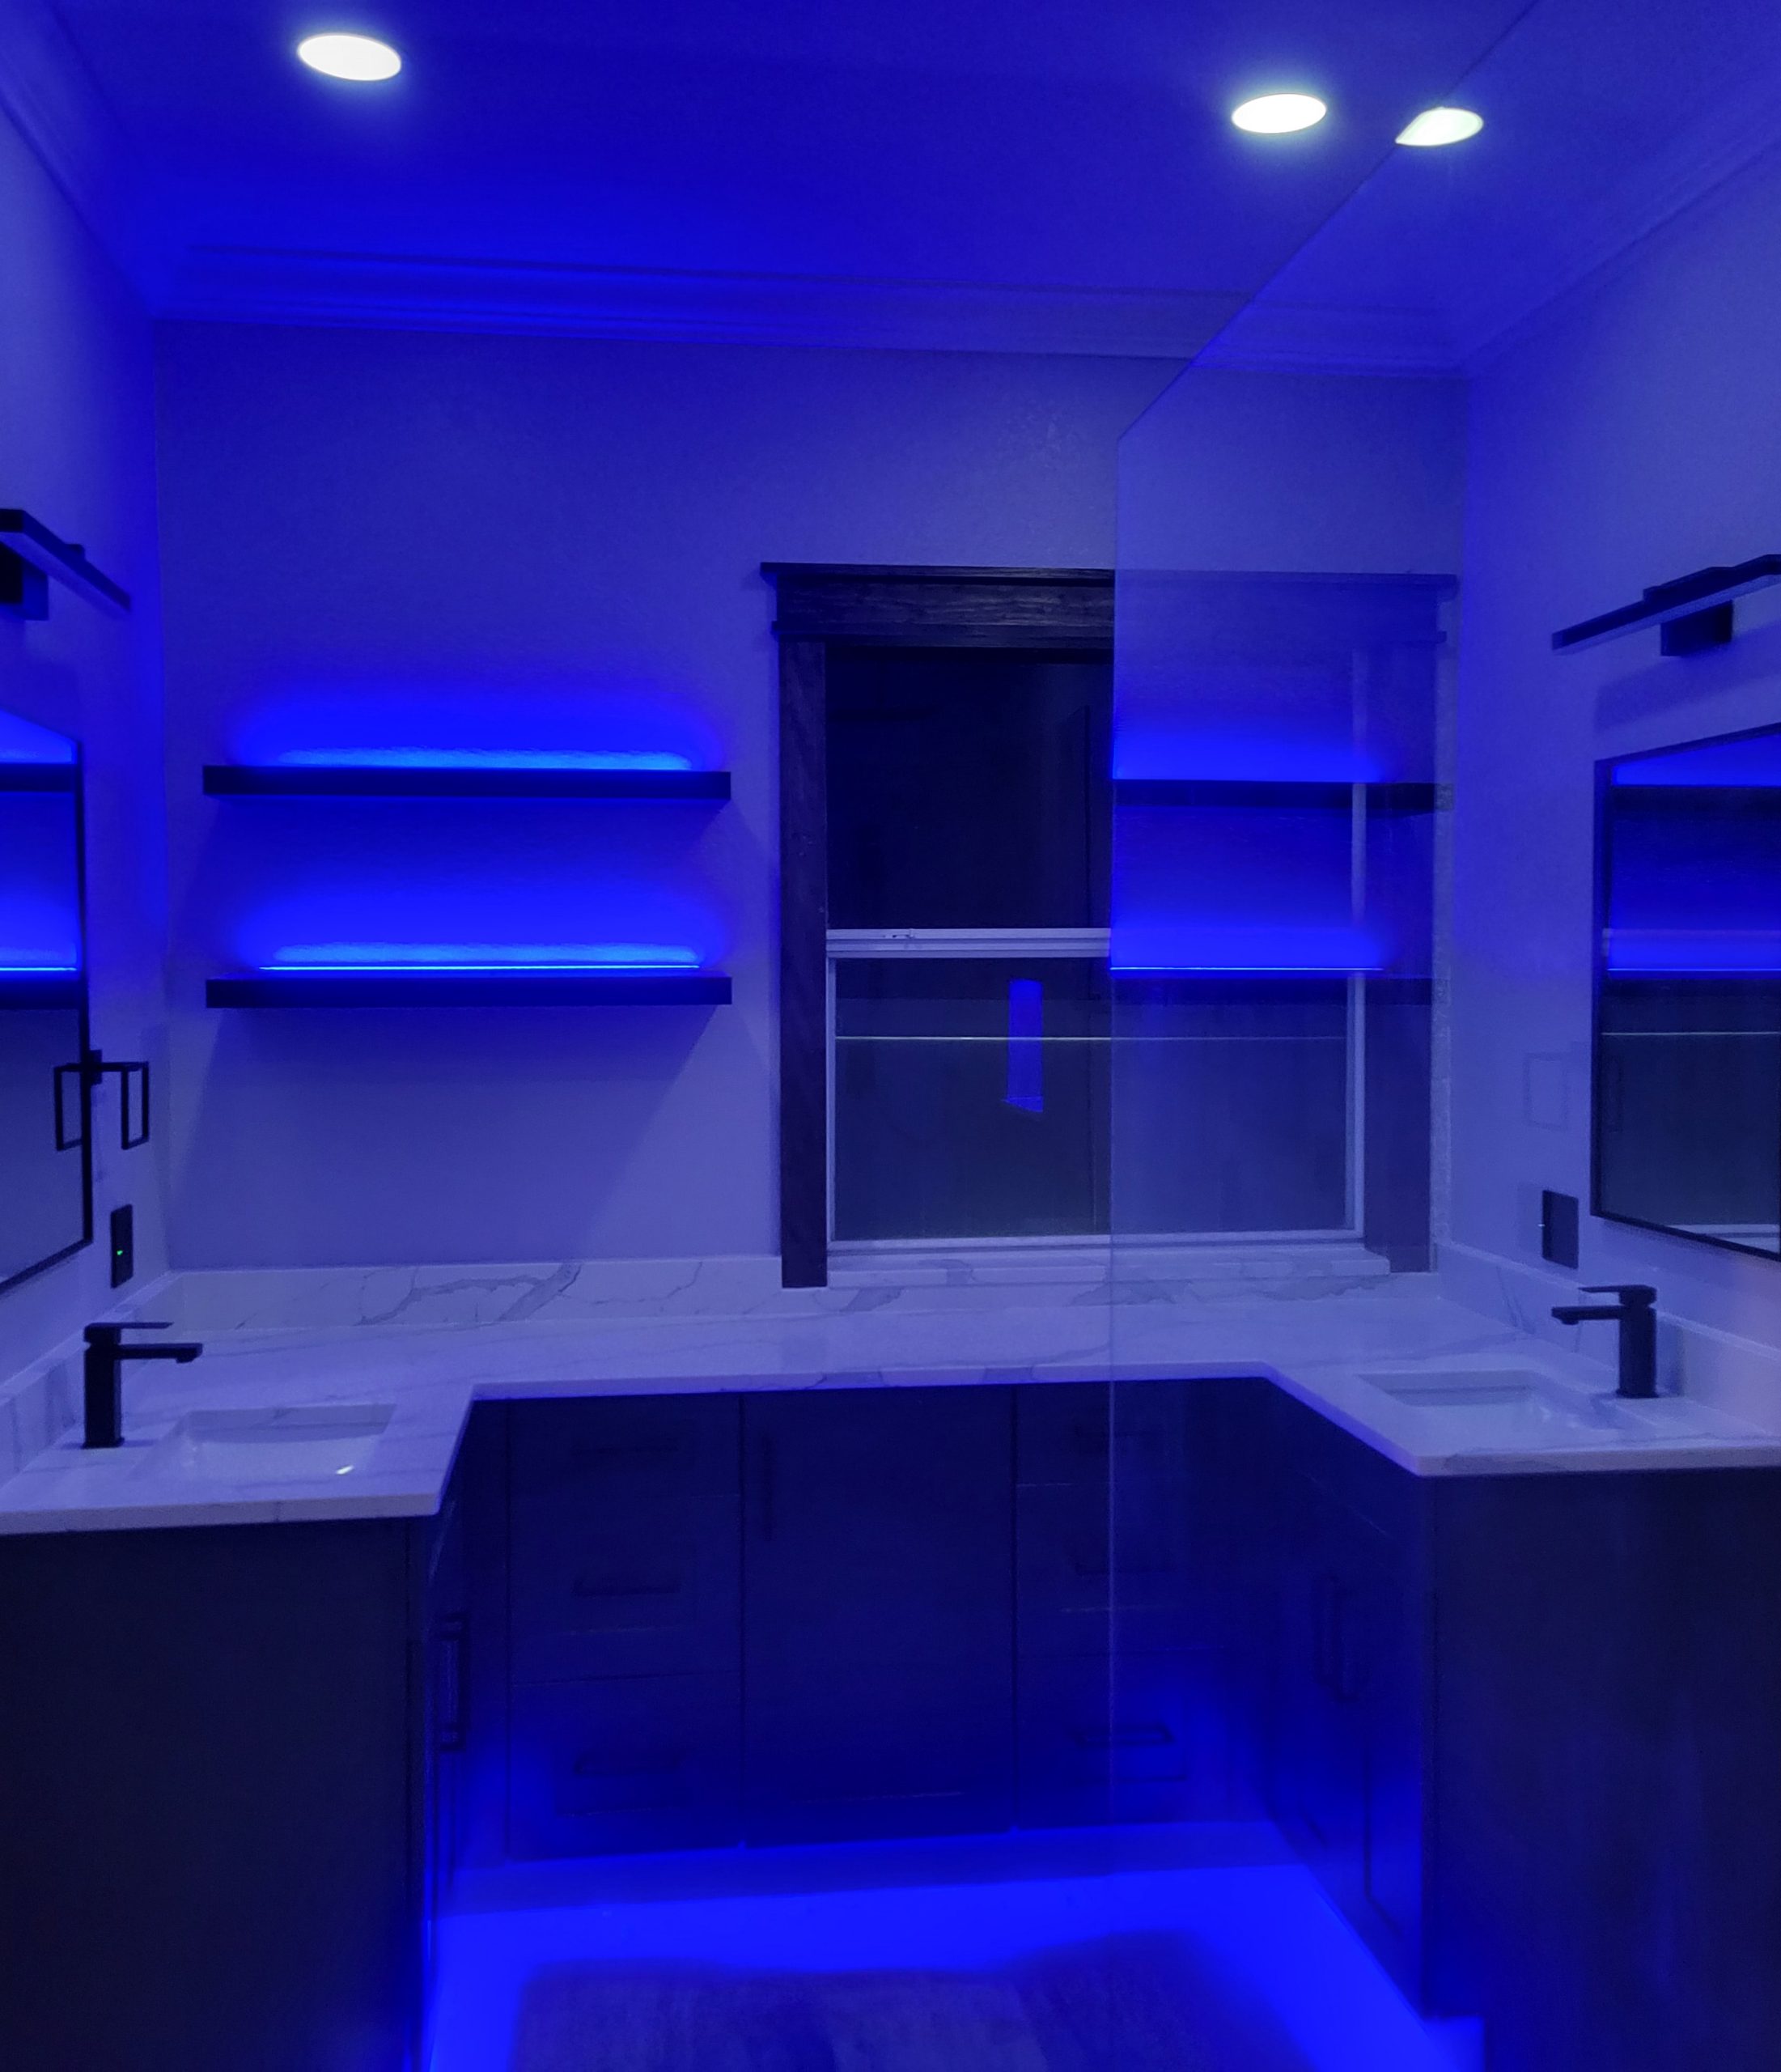 Soloman Design - Kitchen & Bath can also add custom LED lighting solutions to any project